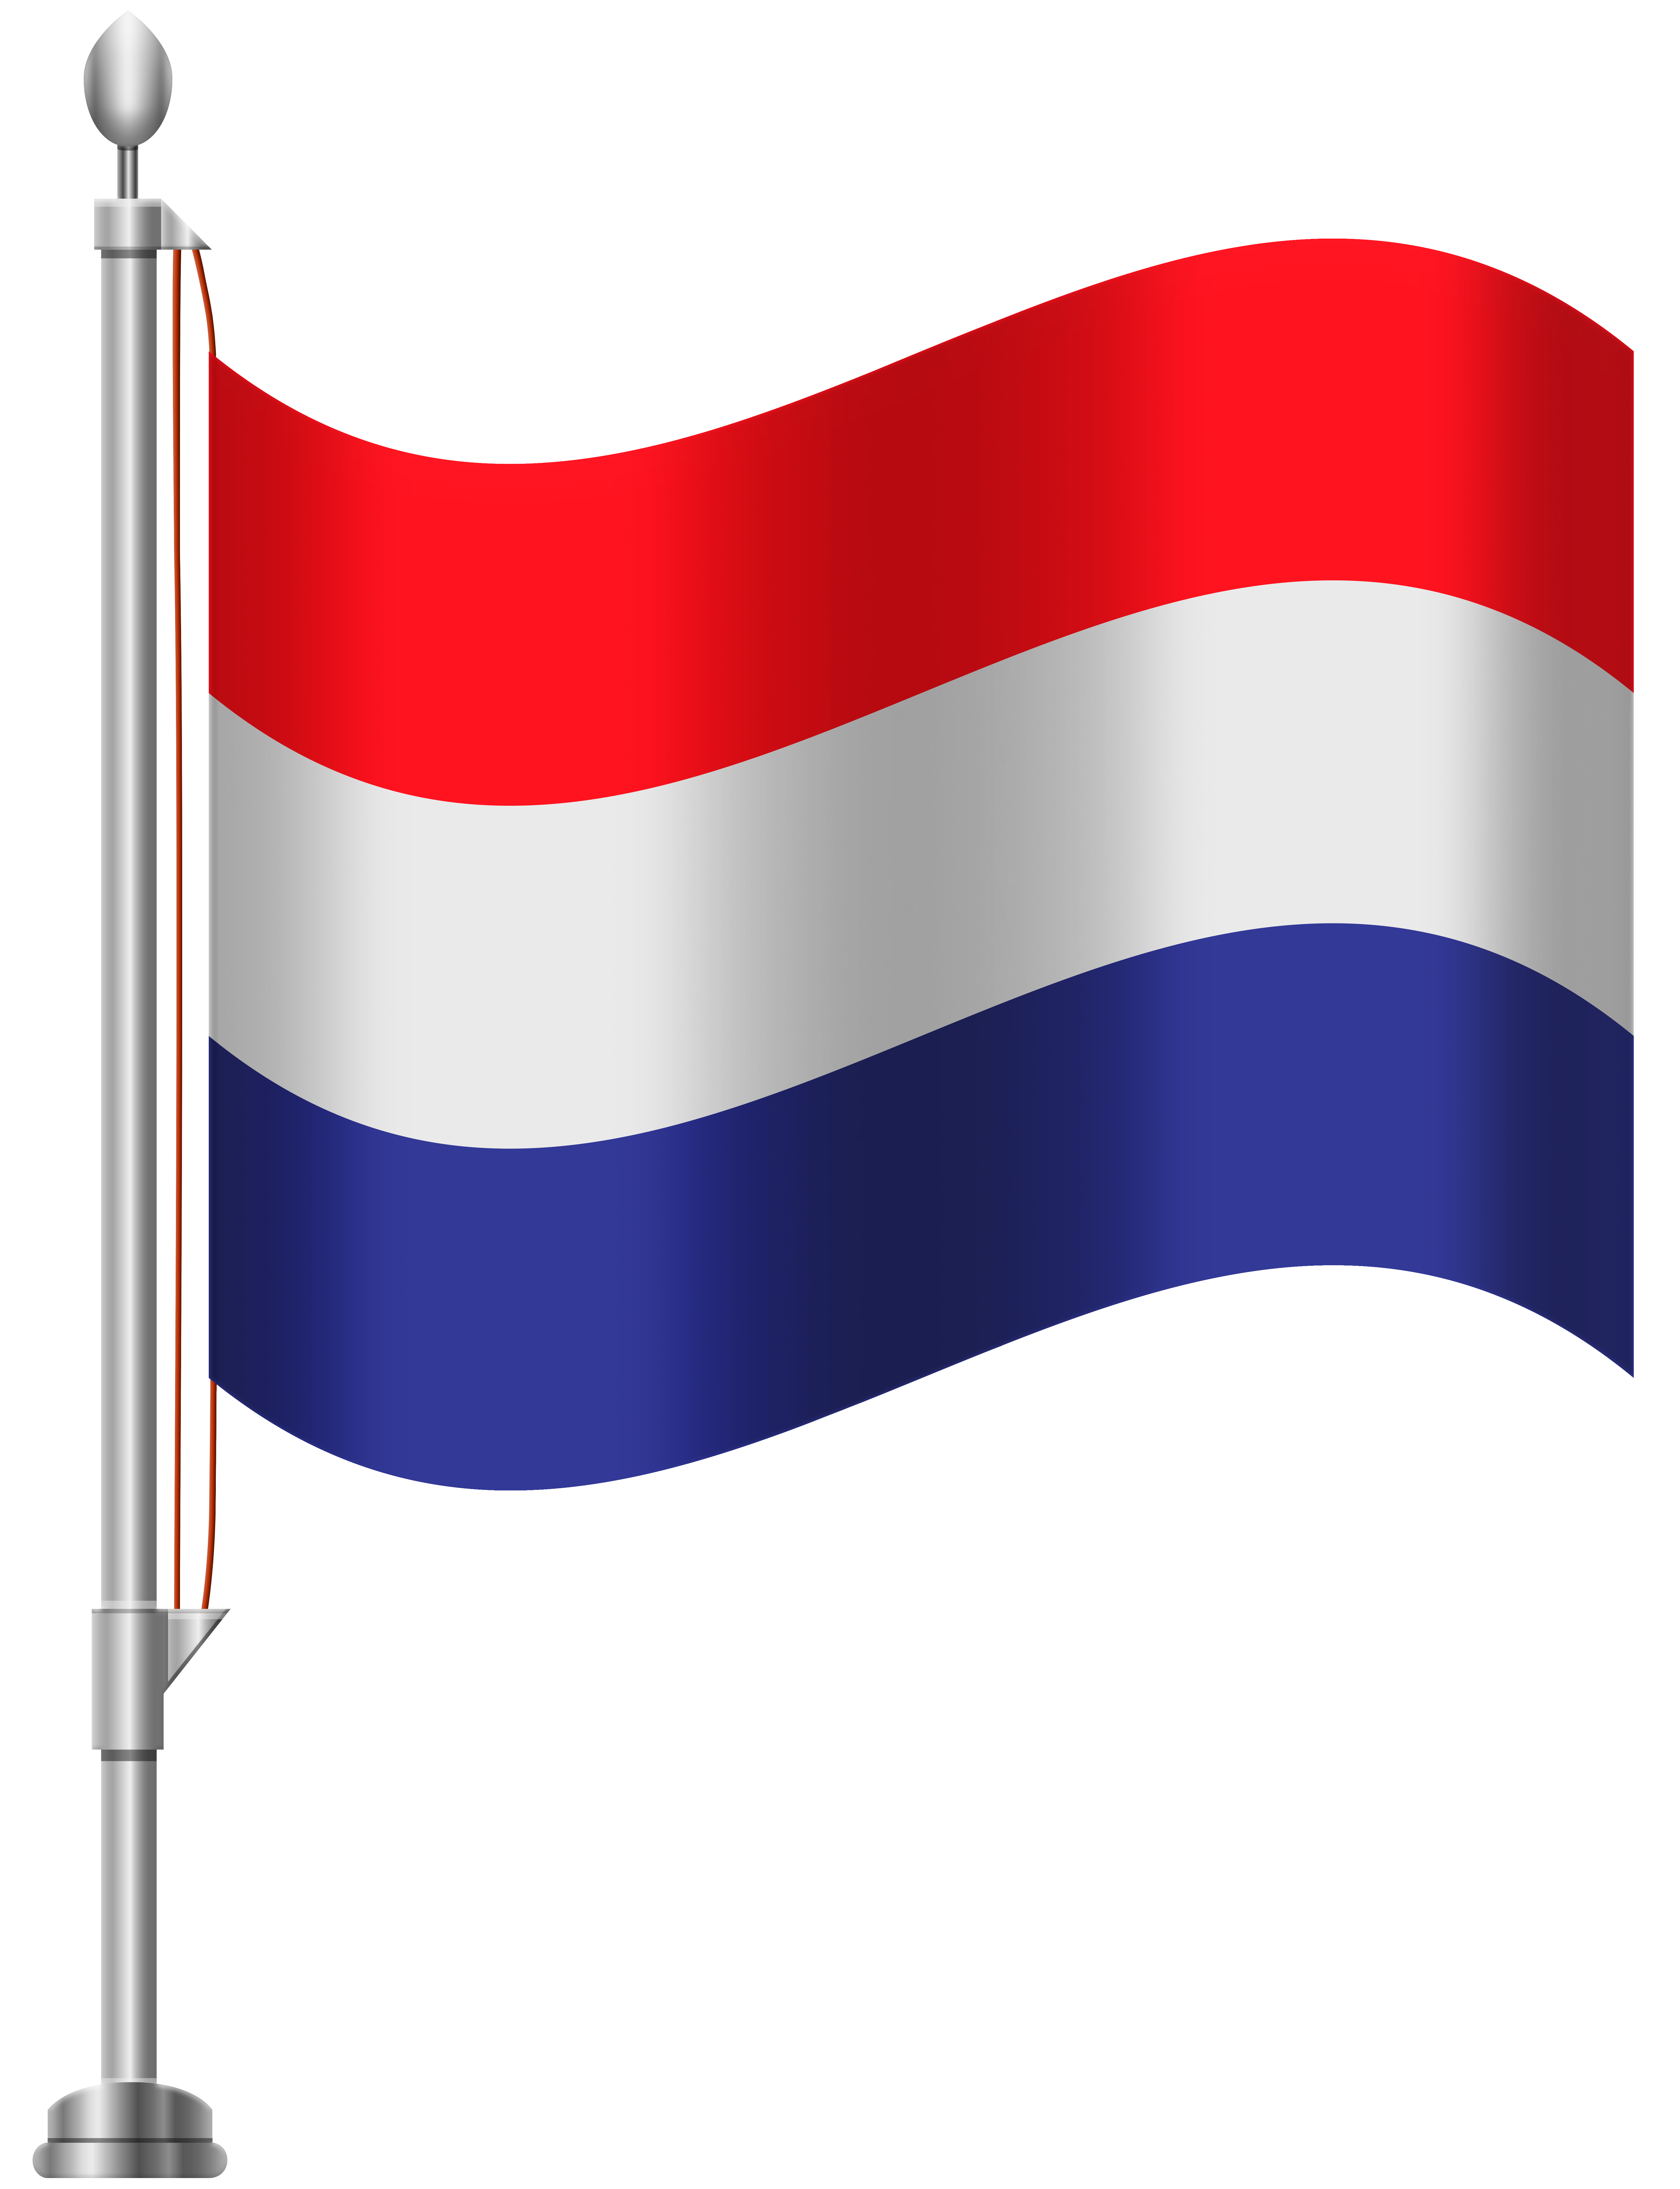 The flag of the netherlands clipart - Clipground